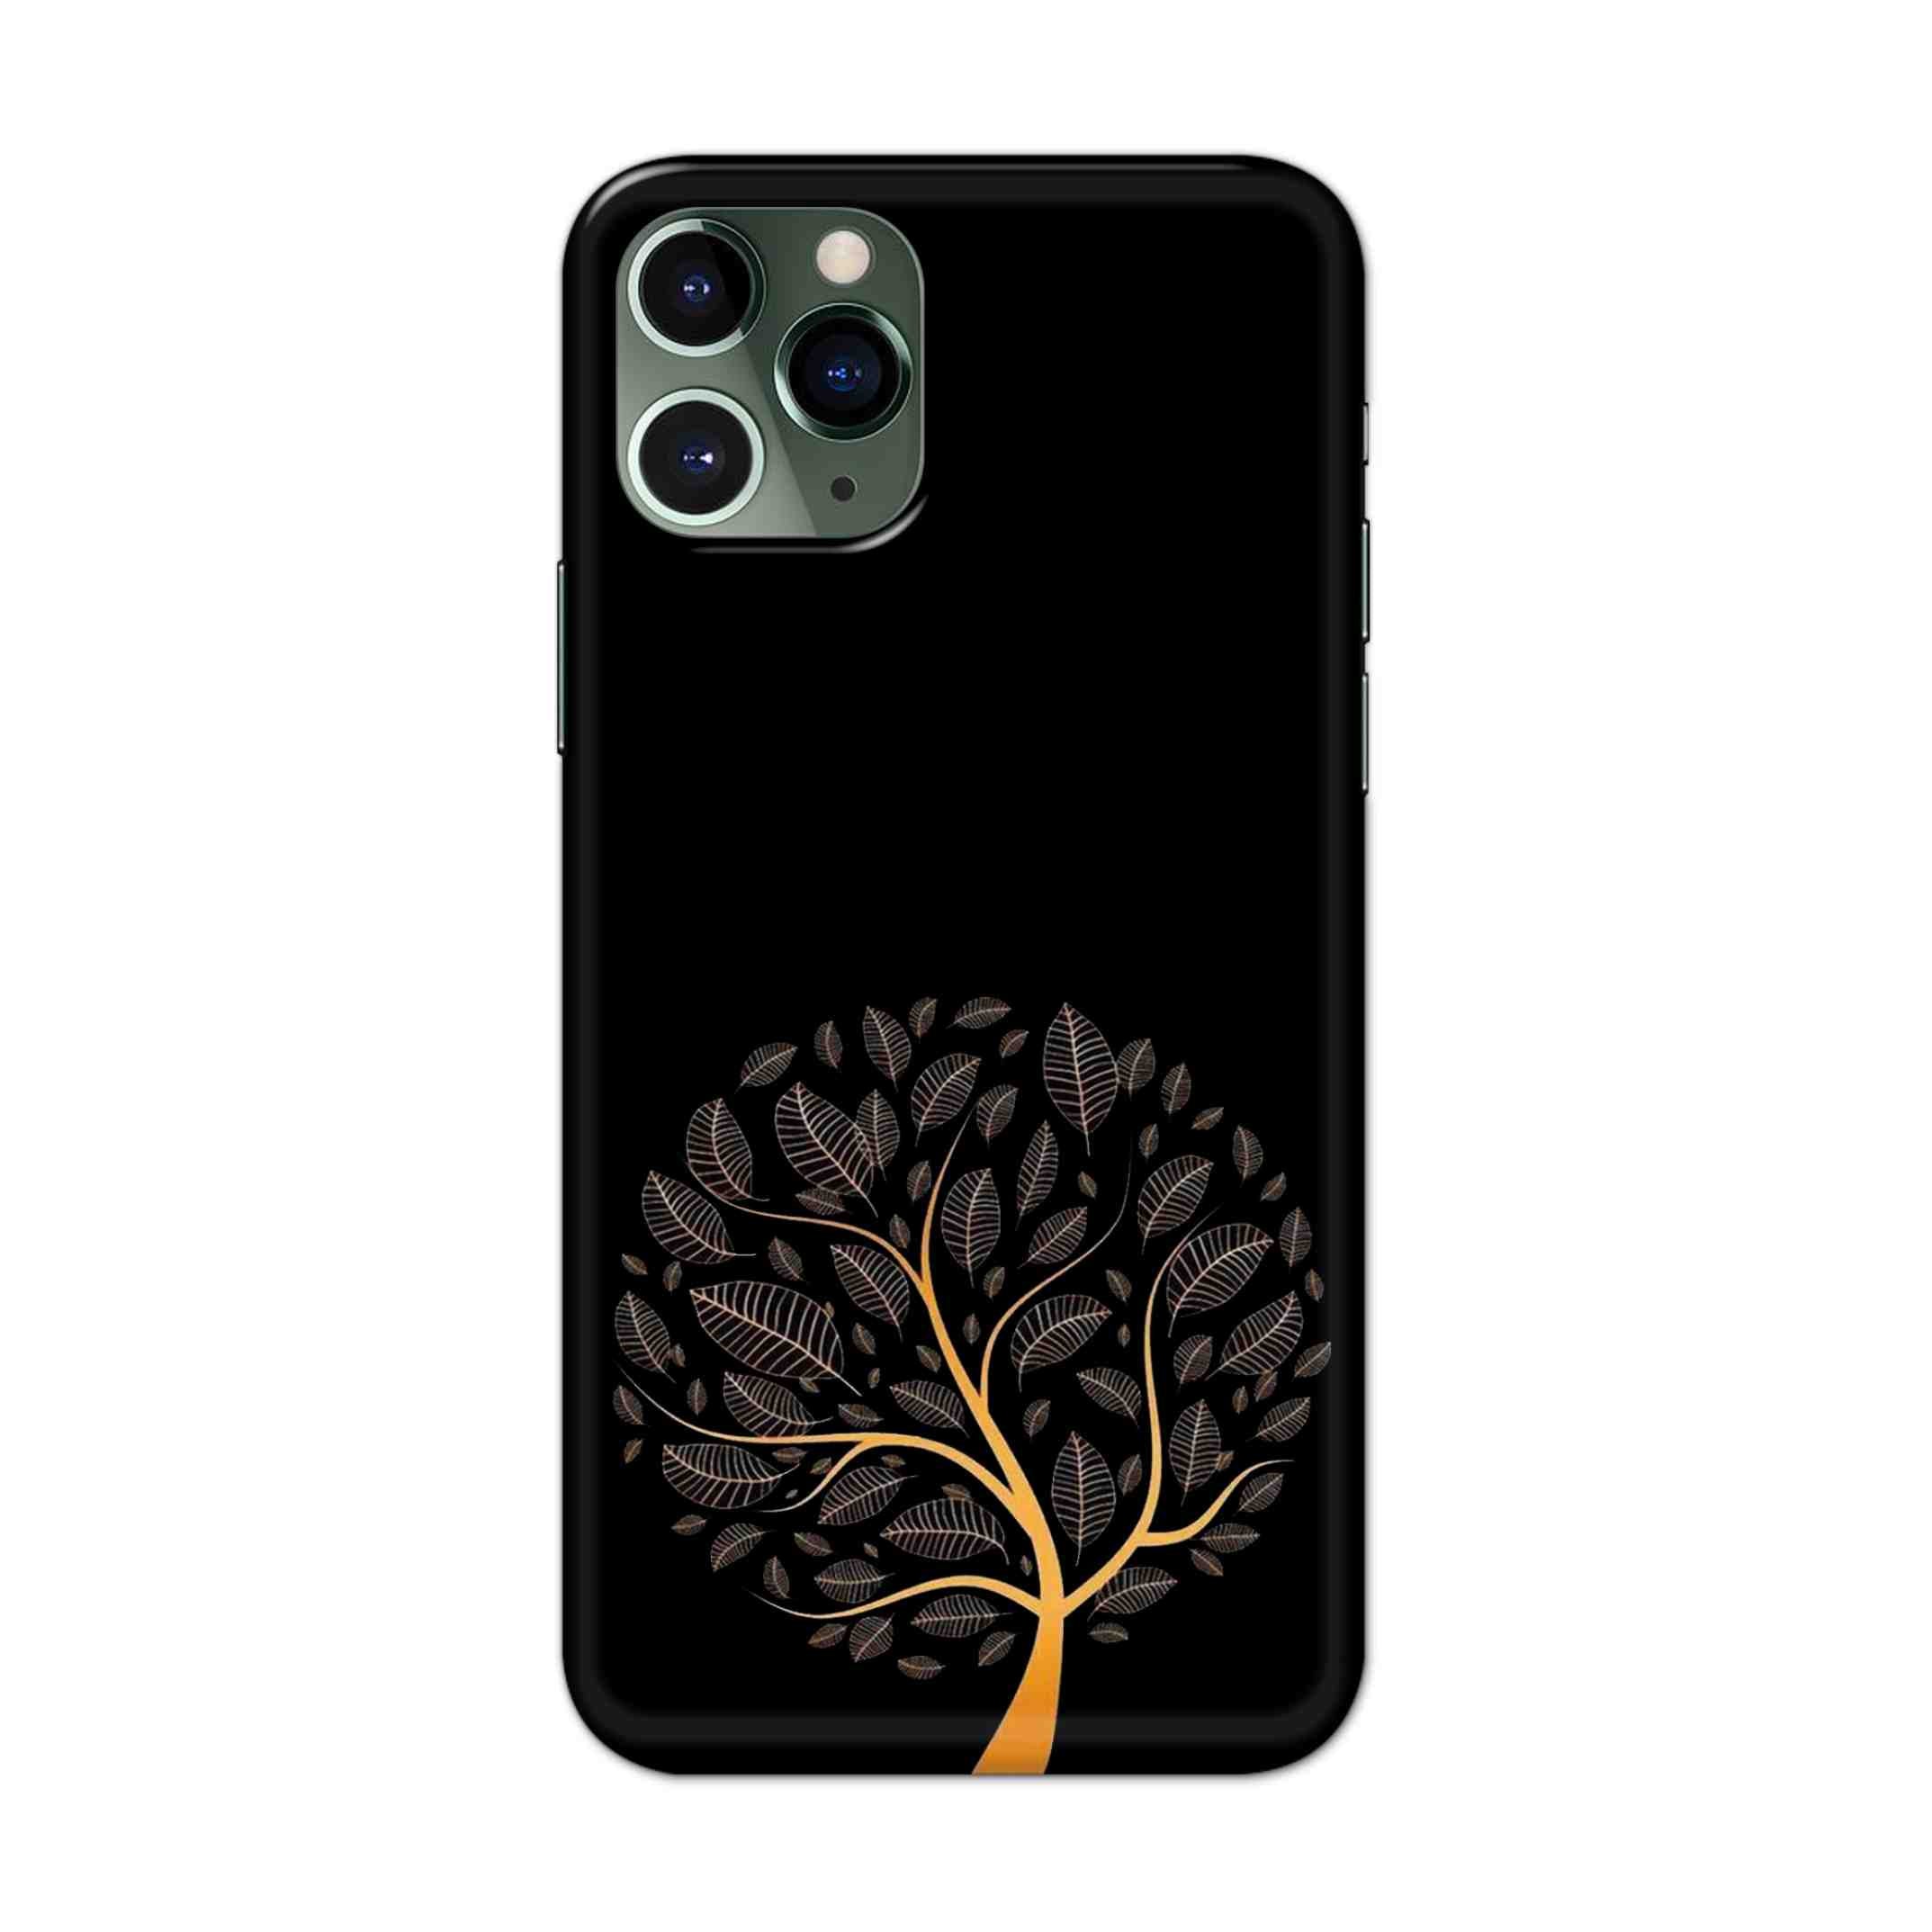 Buy Golden Tree Hard Back Mobile Phone Case/Cover For iPhone 11 Pro Online